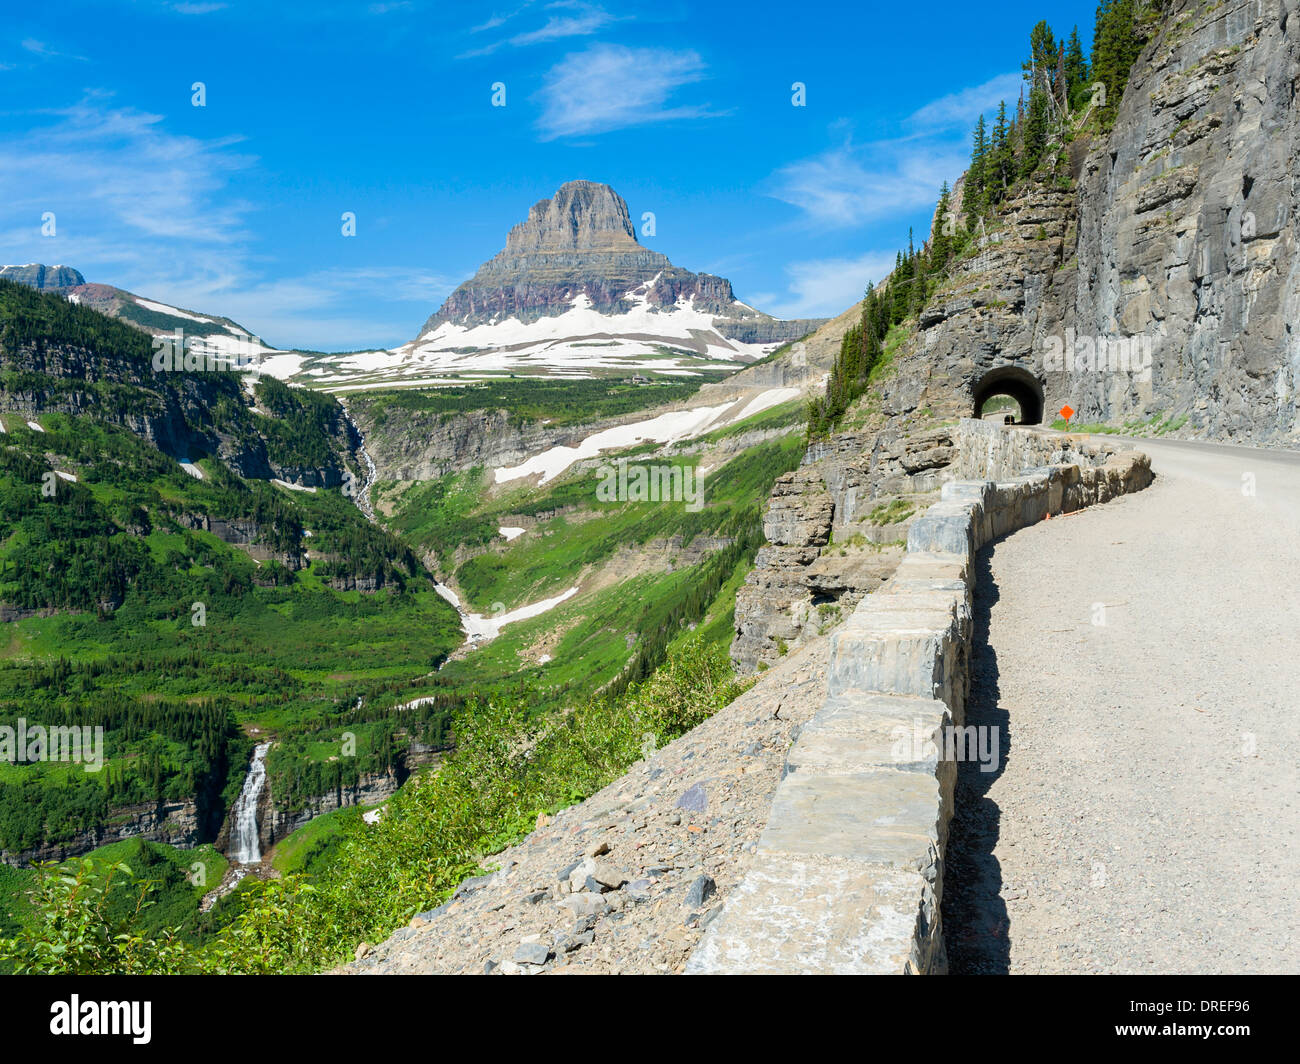 View of Clements Mountain from 'Going-to-the-Sun' Road (built 1921-1932), Glacier National Park, Montana, USA. Stock Photo